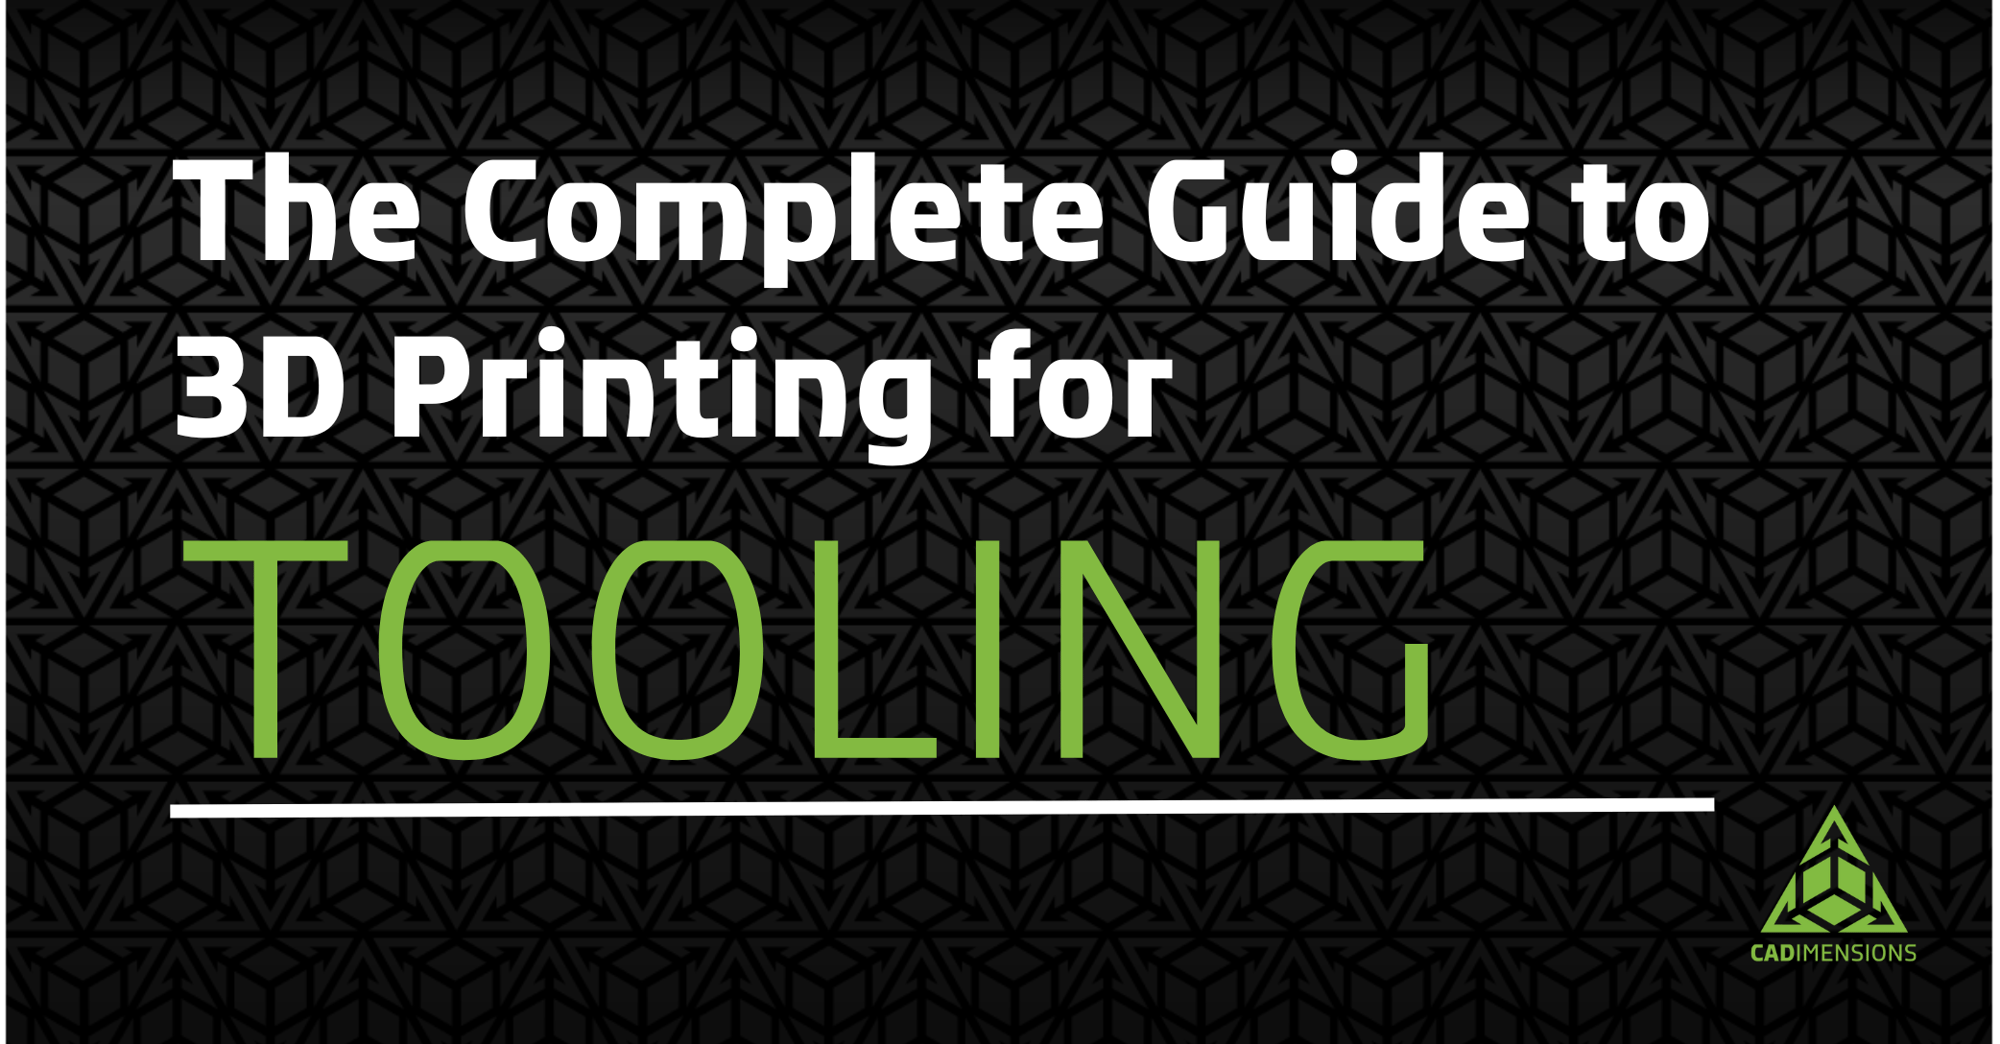 The Complete Guide To Tooling